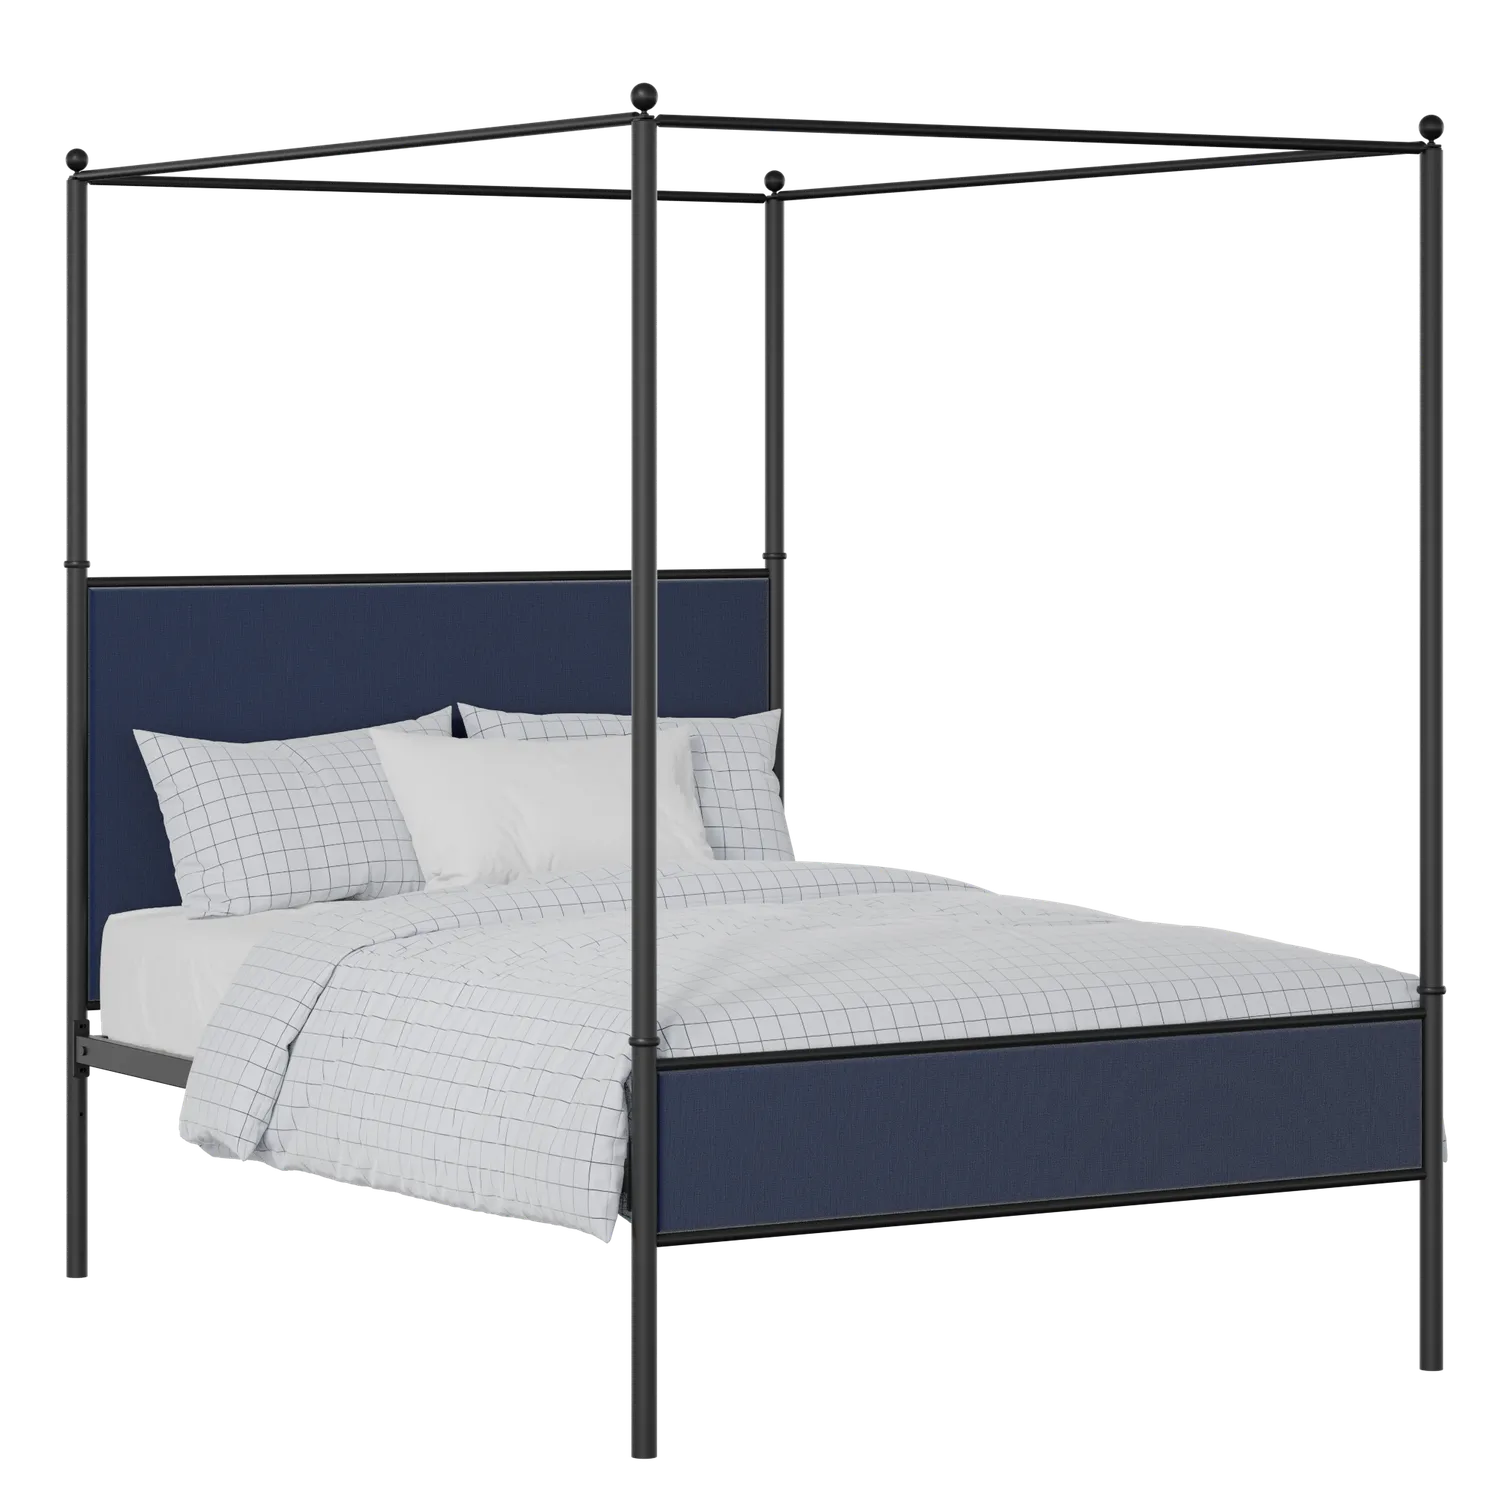 Reims Slim iron/metal upholstered bed in black with blue fabric